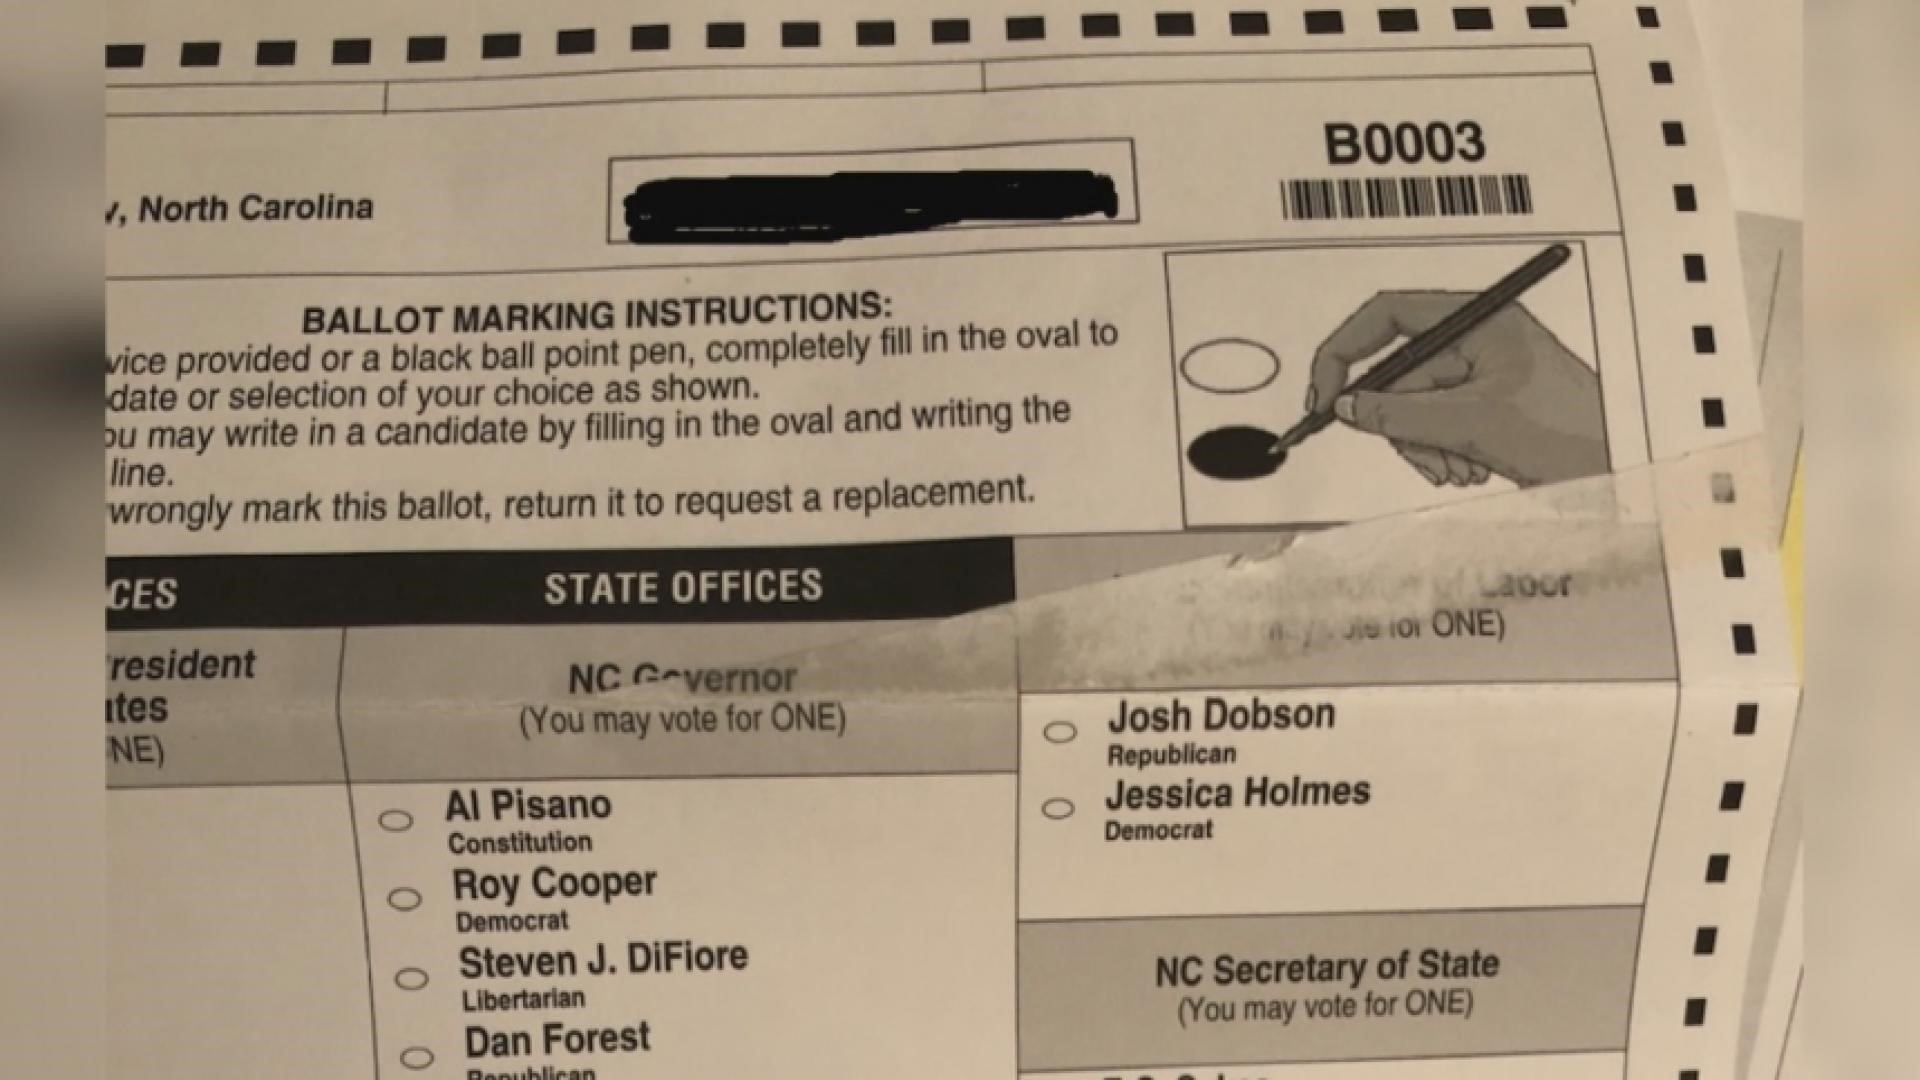 Voters in New Hanover County reported receiving damaged absentee ballots in the mail.